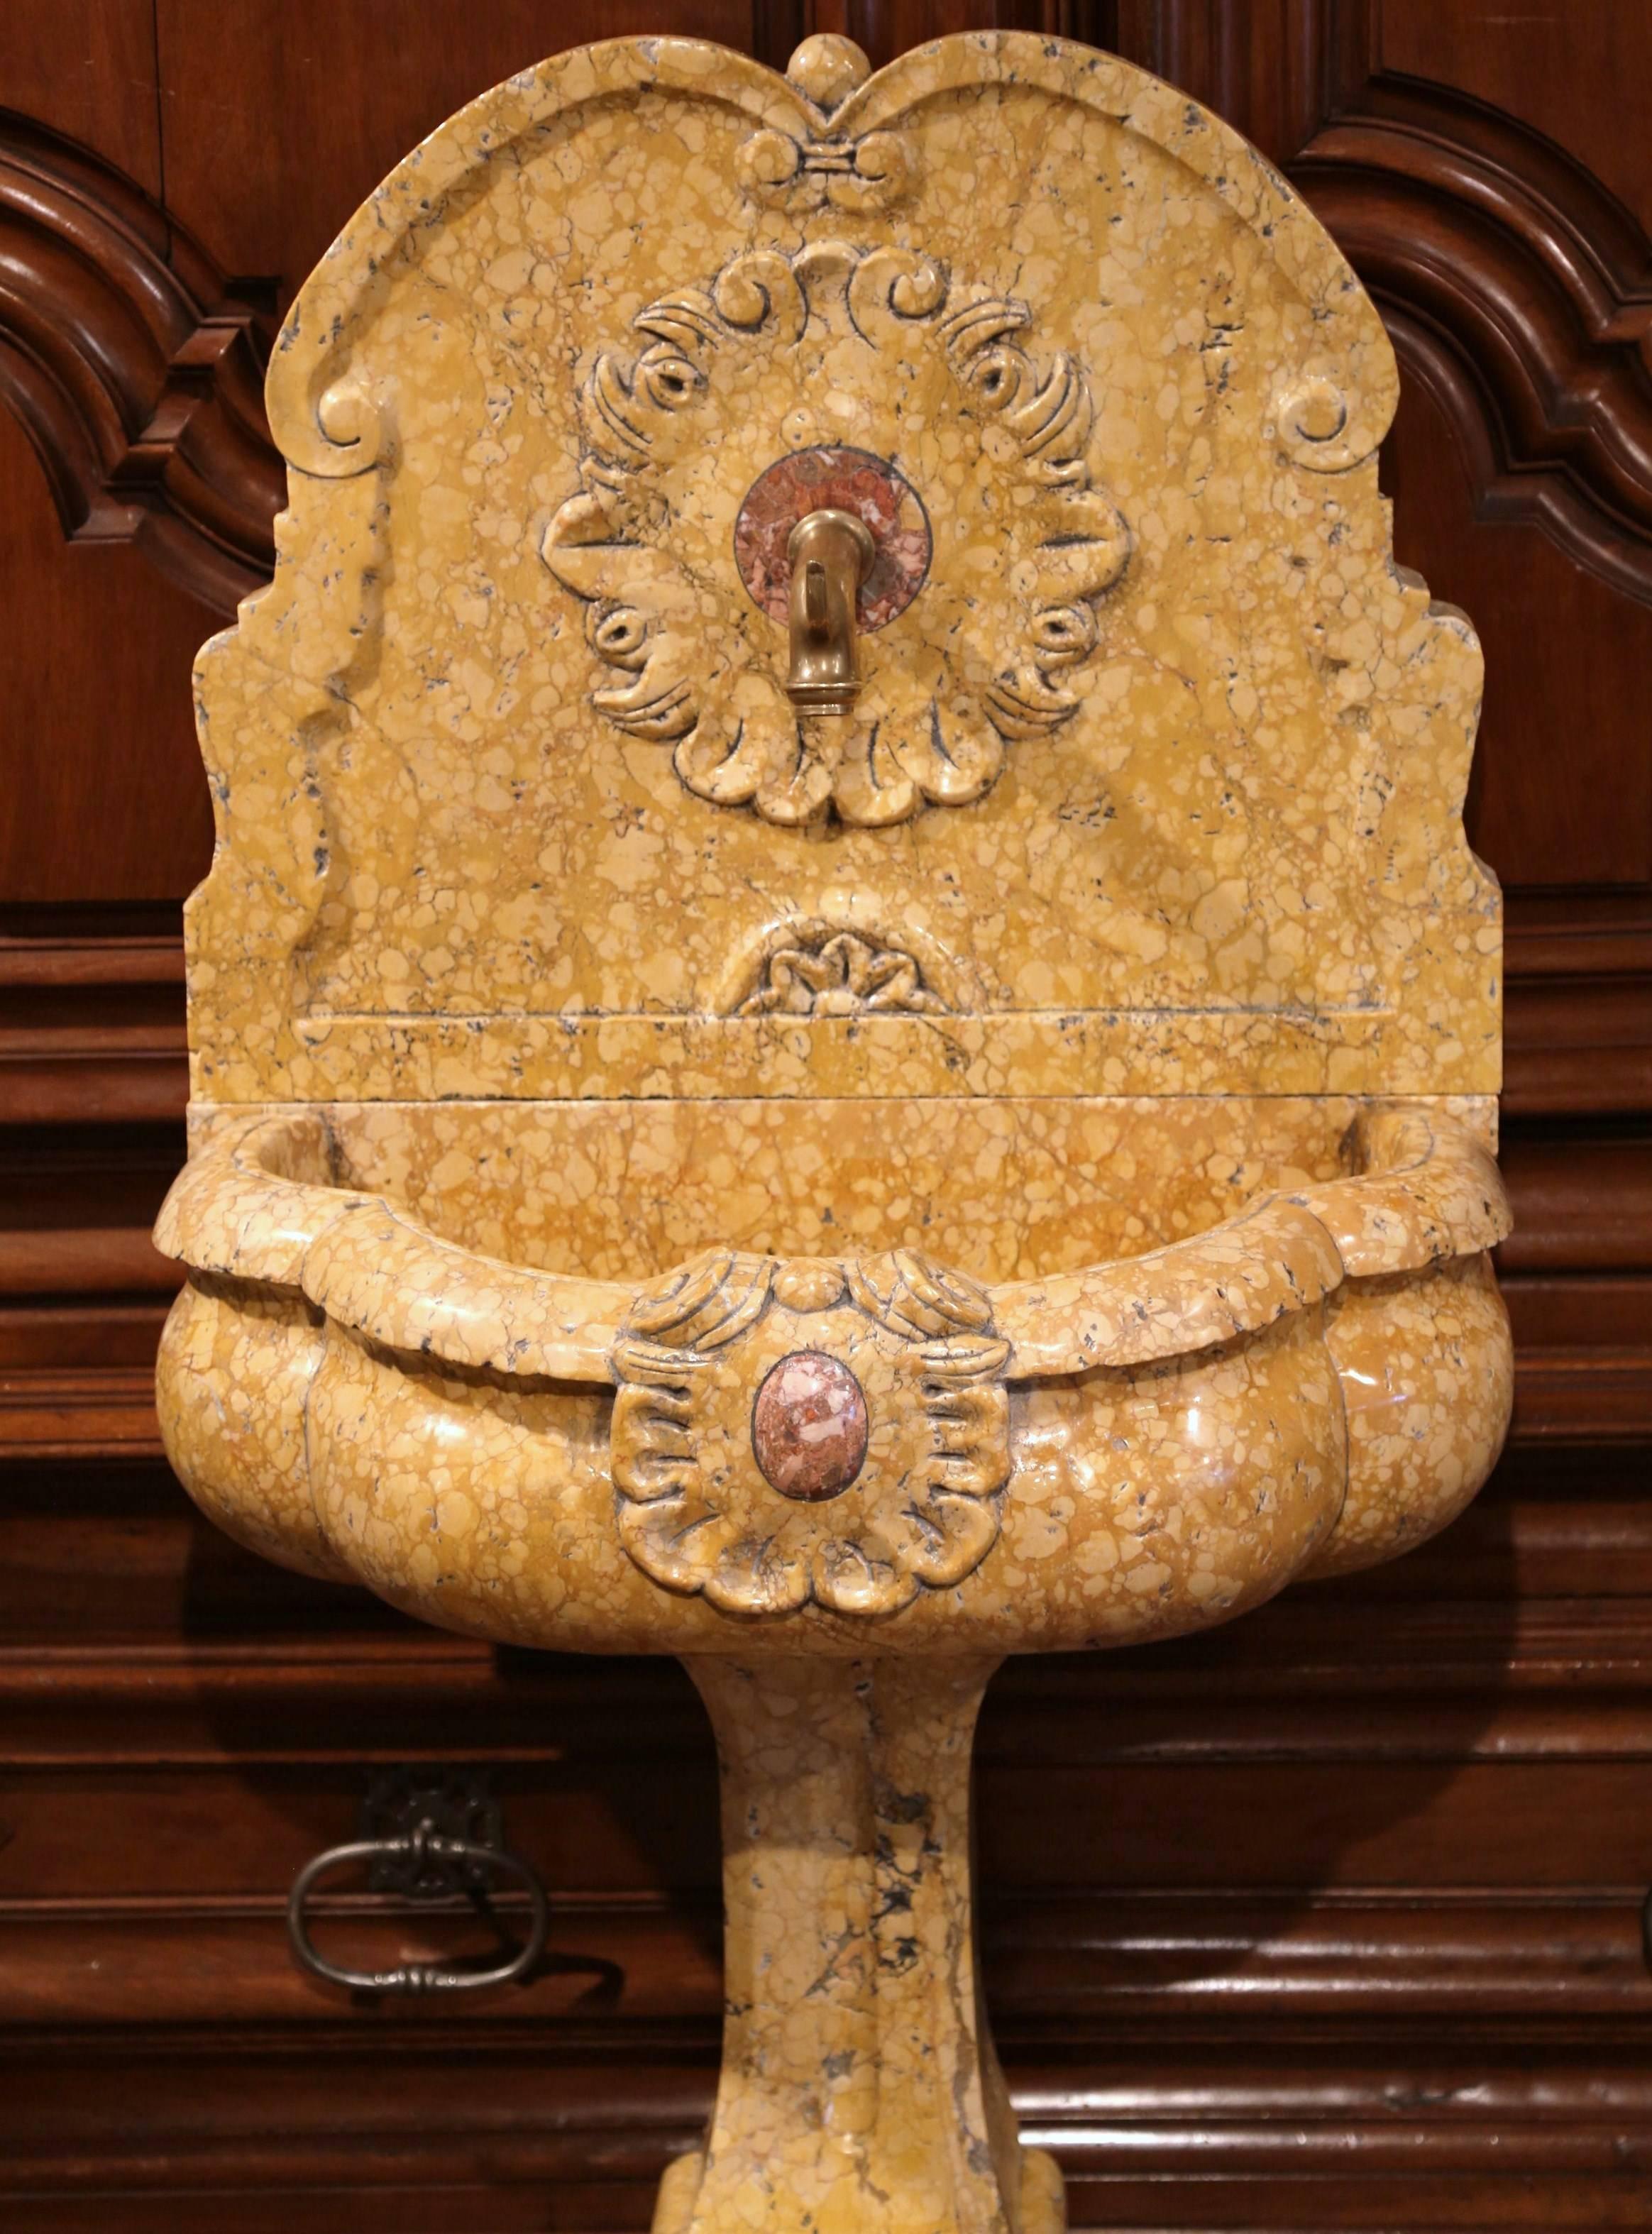 Elegant Italian marble fountain from Italy; carved circa 2000, the colorful fountain is made of three parts, a base, a basin and a back splash with brass spout. A great addition for a patio, a green room, or to convert into a powder room